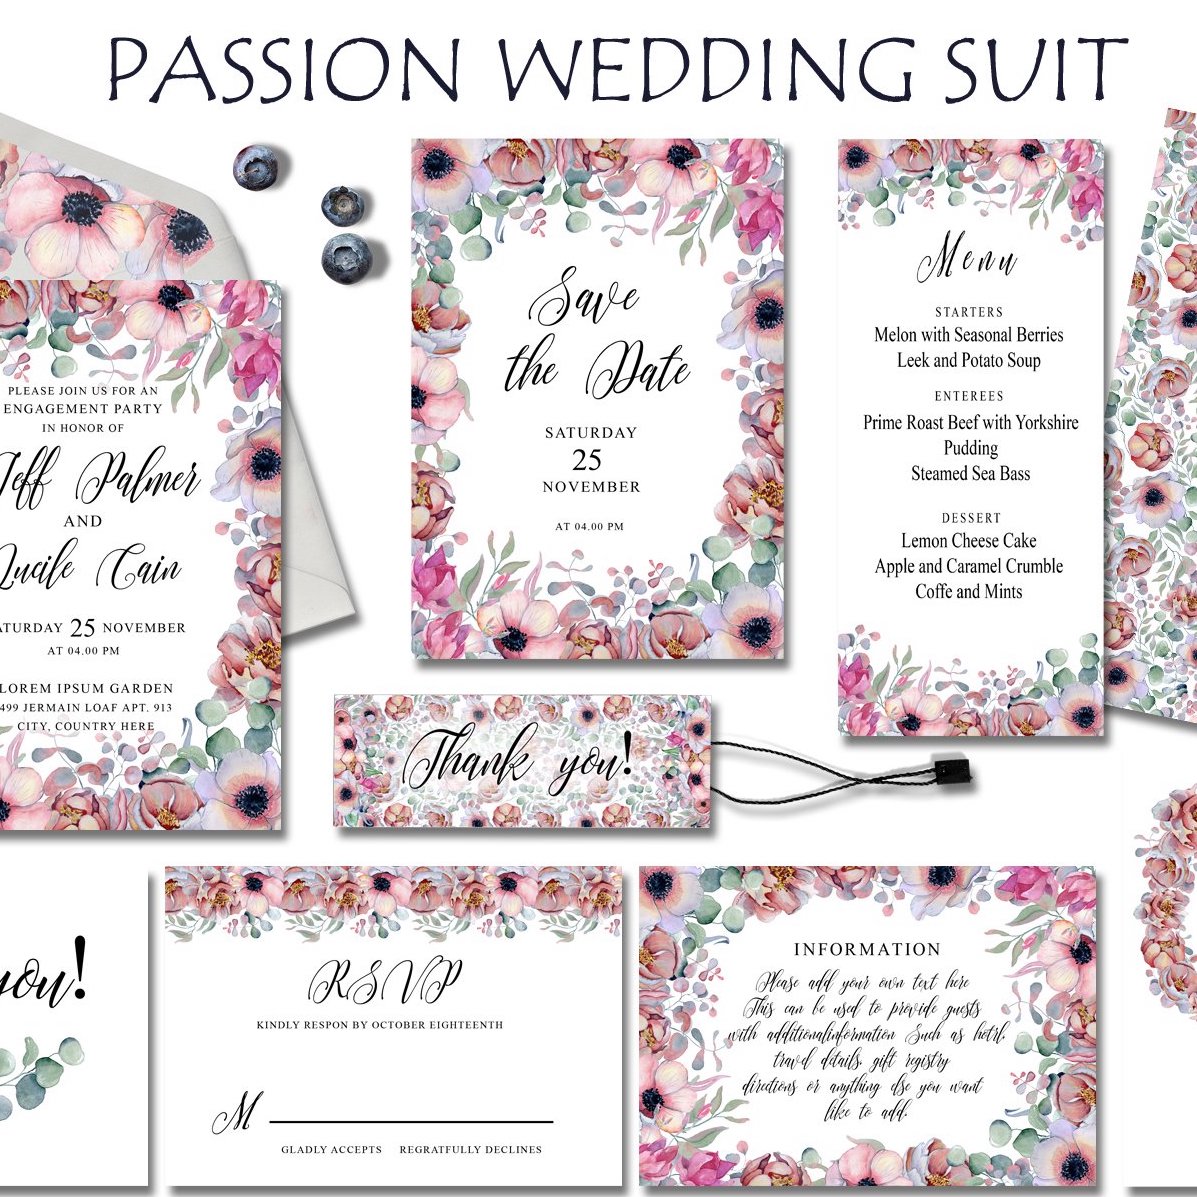 Passion flowers Wedding Suit cover image.